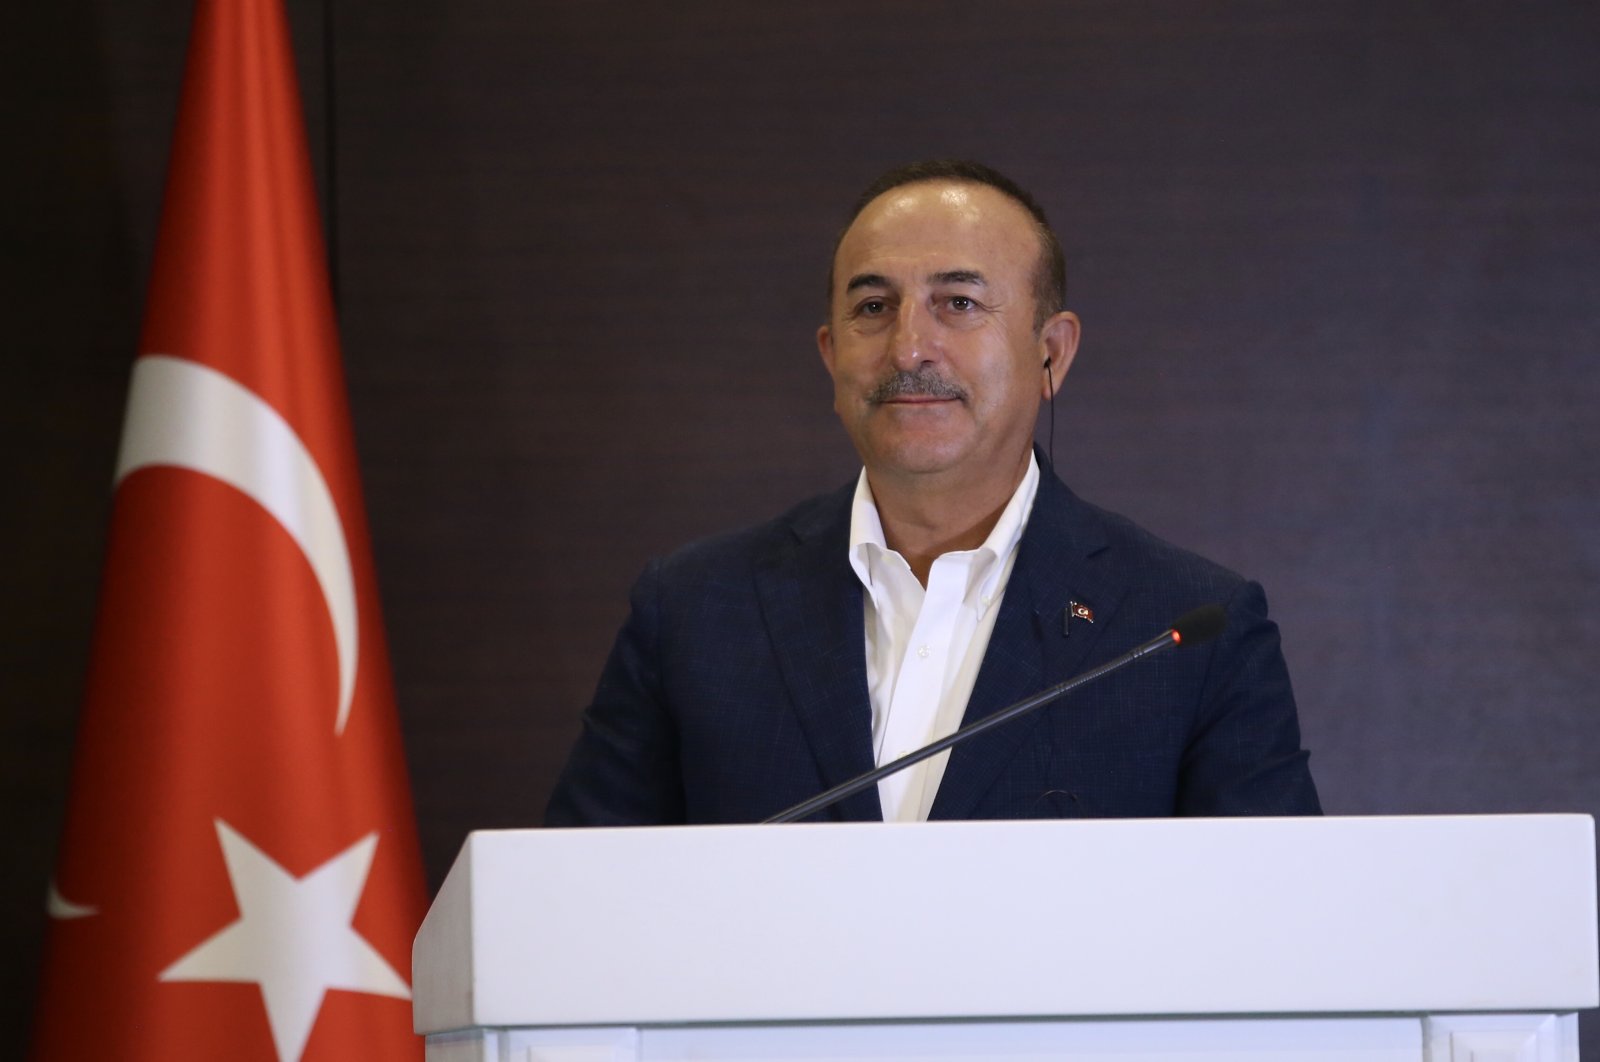 Turkish Foreign Minister Mevlüt Çavuşoğlu (pictured) and his Ukrainian counterpart Dmytro Kuleba (not pictured) during a joint news conference, Antalya, Turkey, July 3, 2020. (AA Photo)